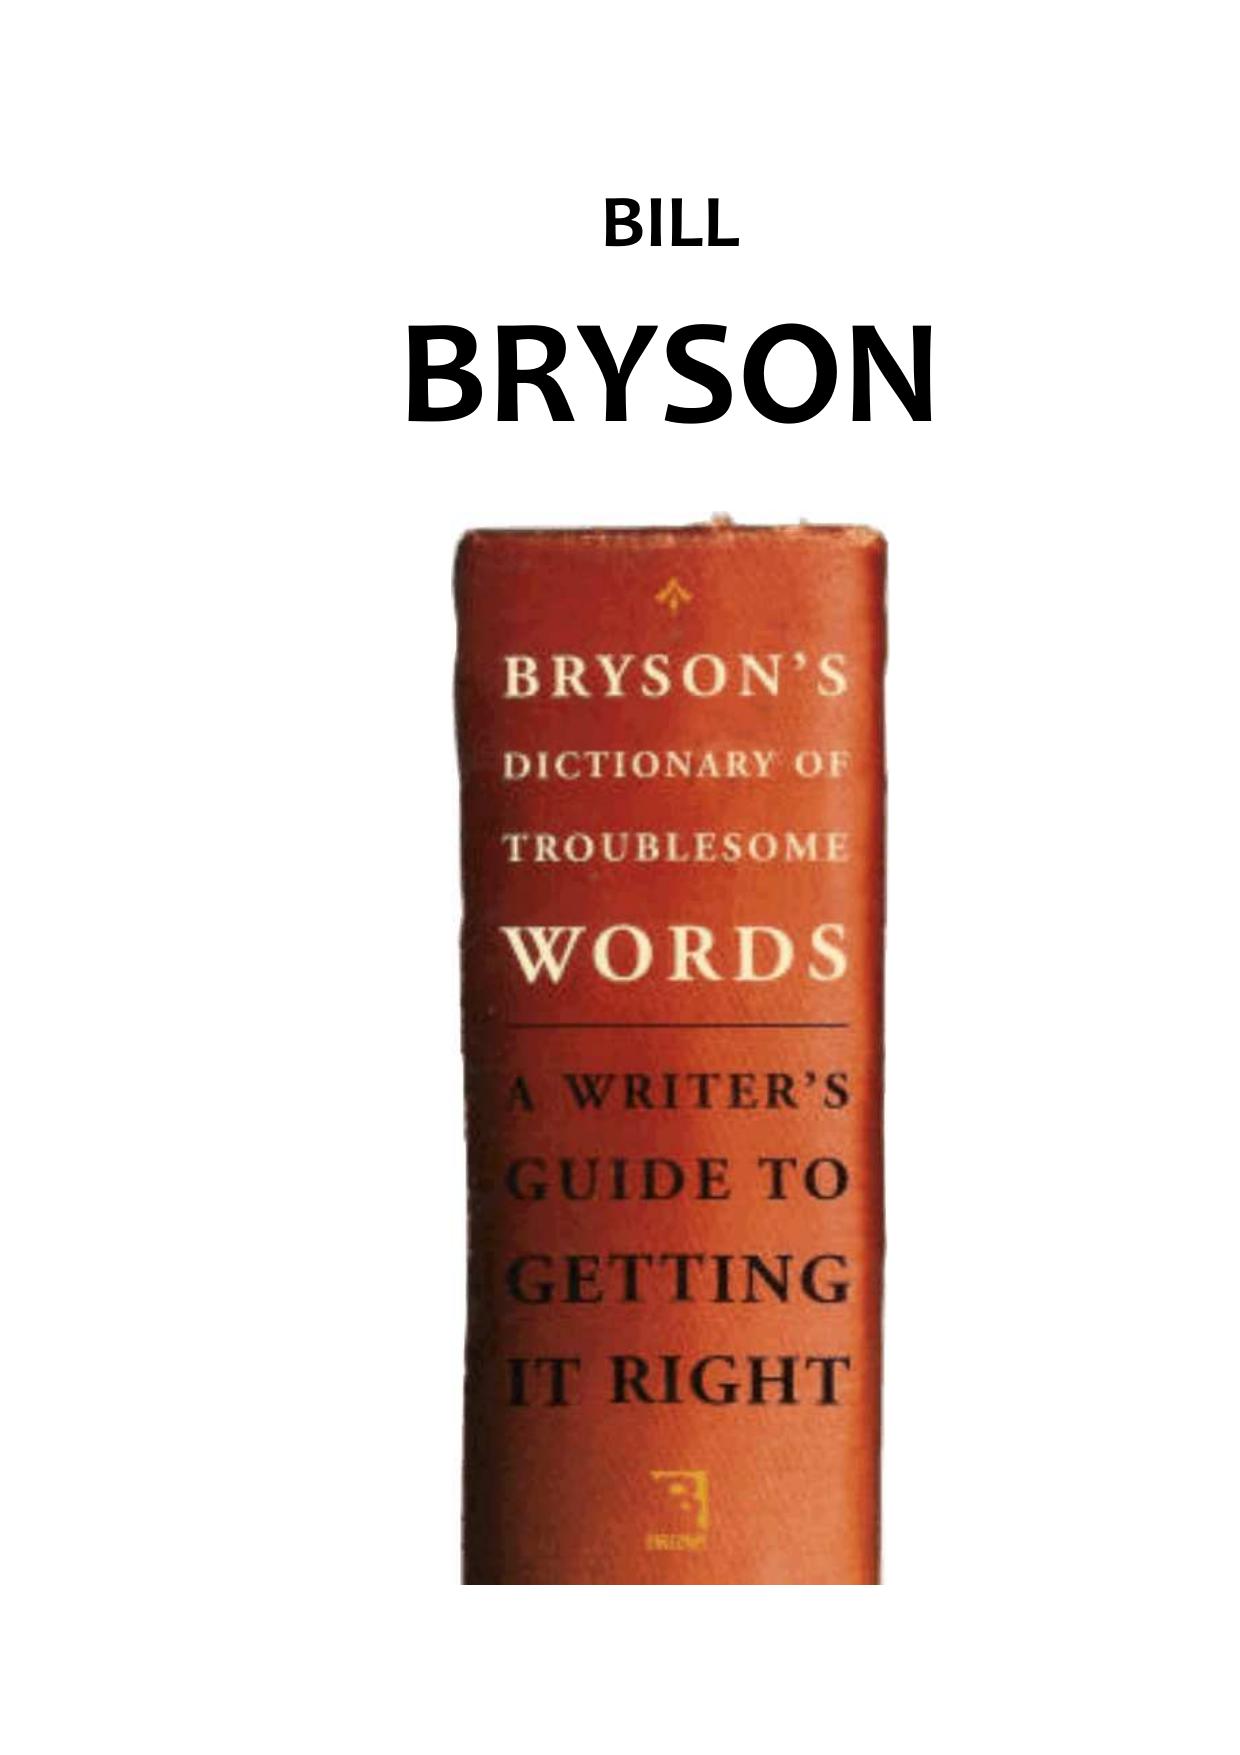 Bryson's dictionary of troublesome words: A writer's guide to getting it right